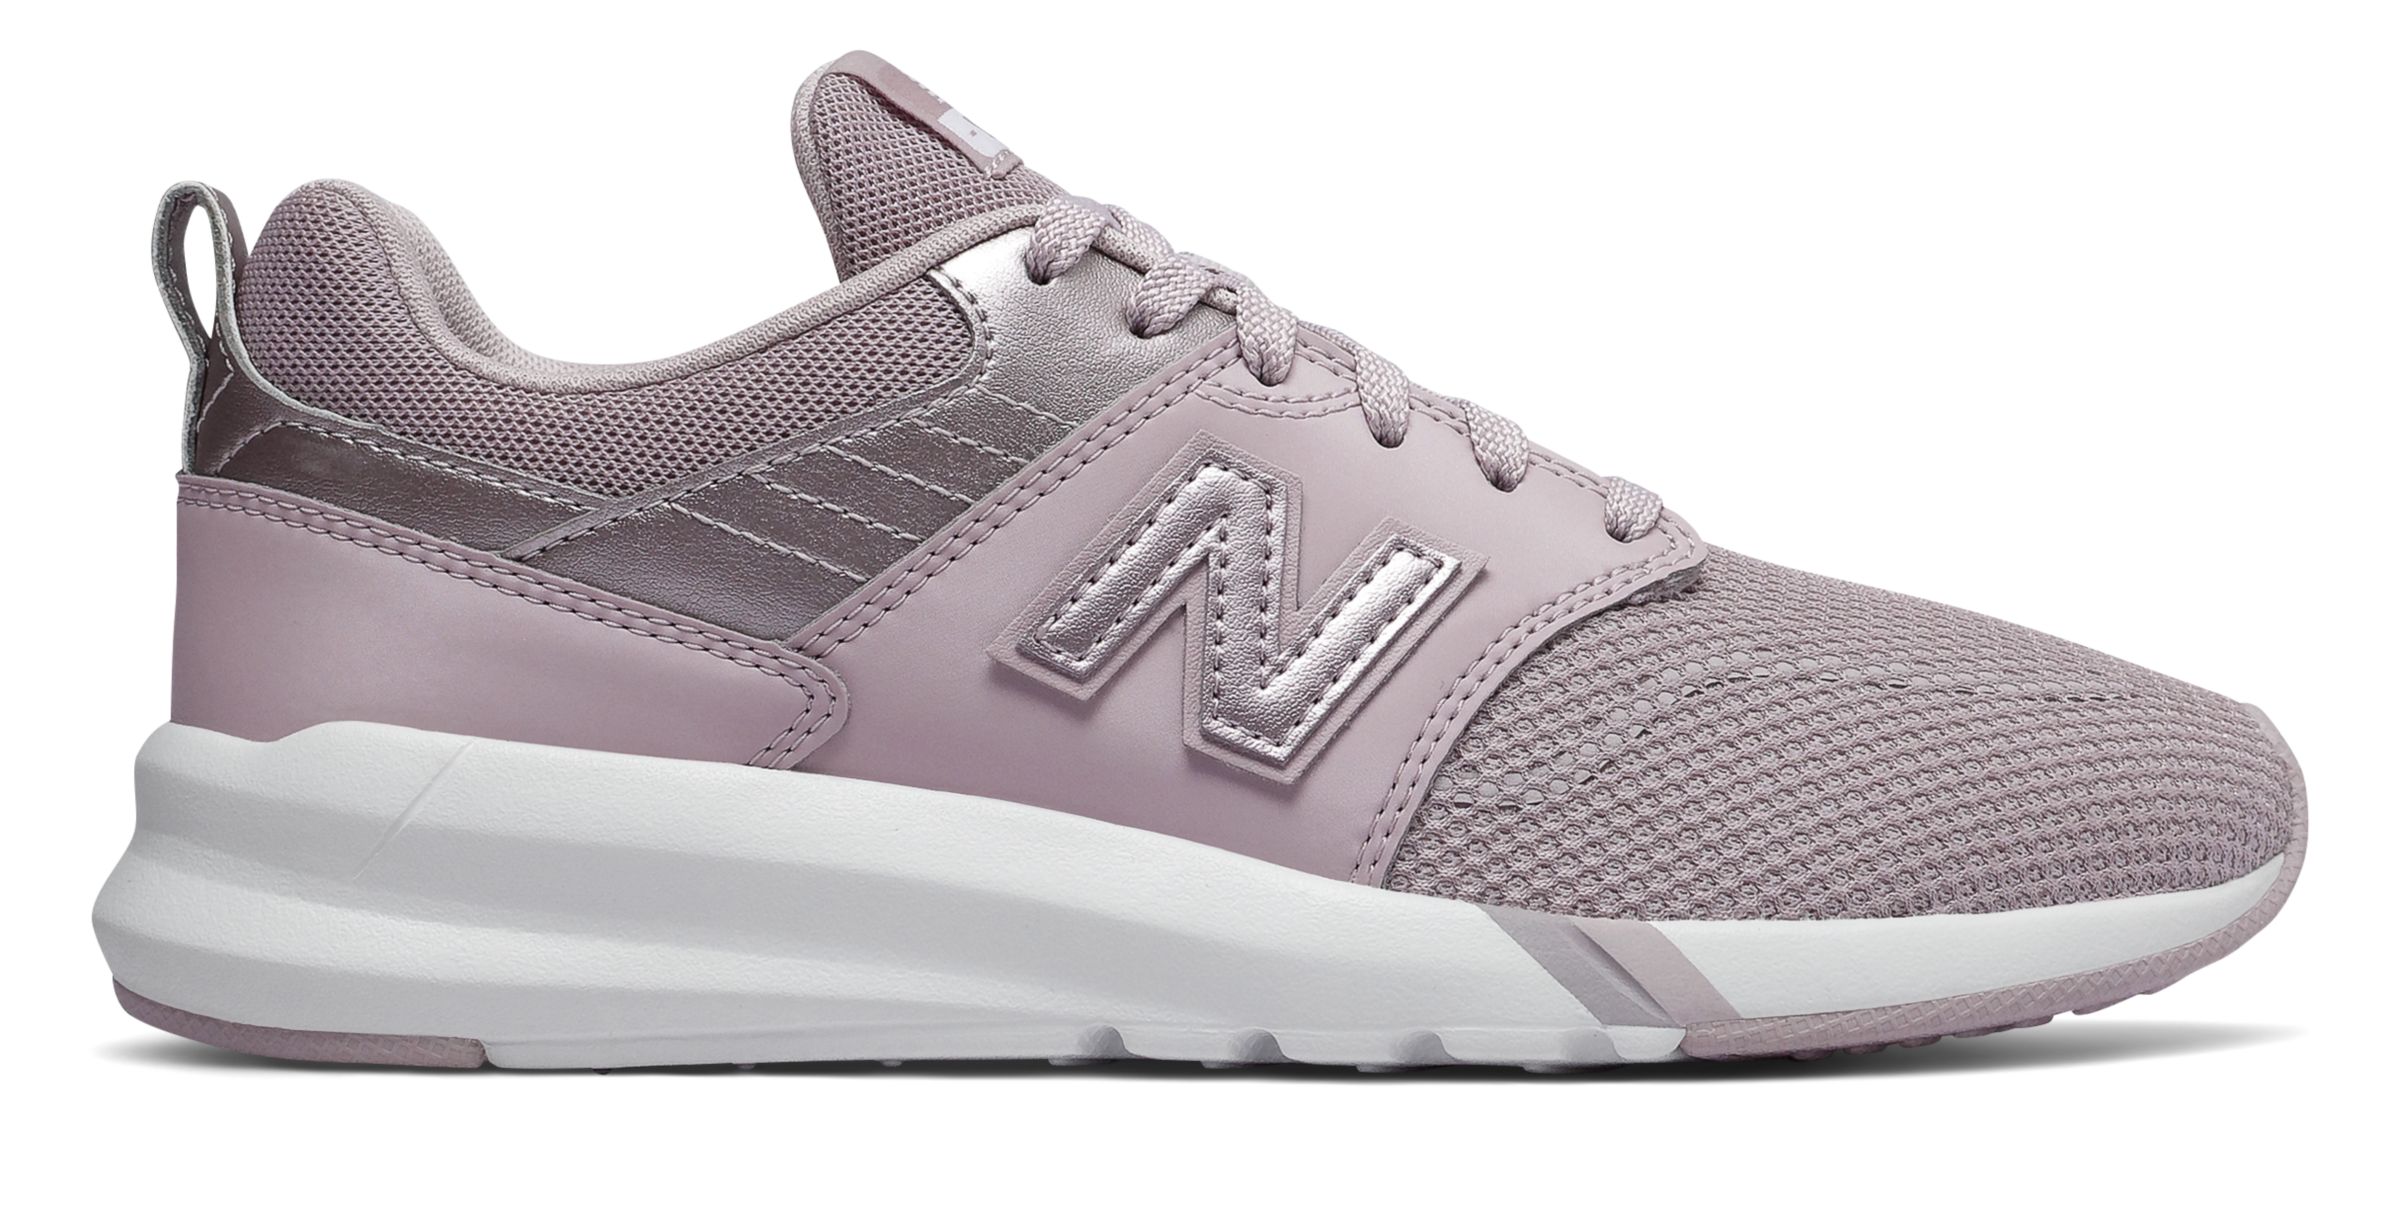 Sneaker Obsession: Gray New Balance Shoes for Your Naughty Side